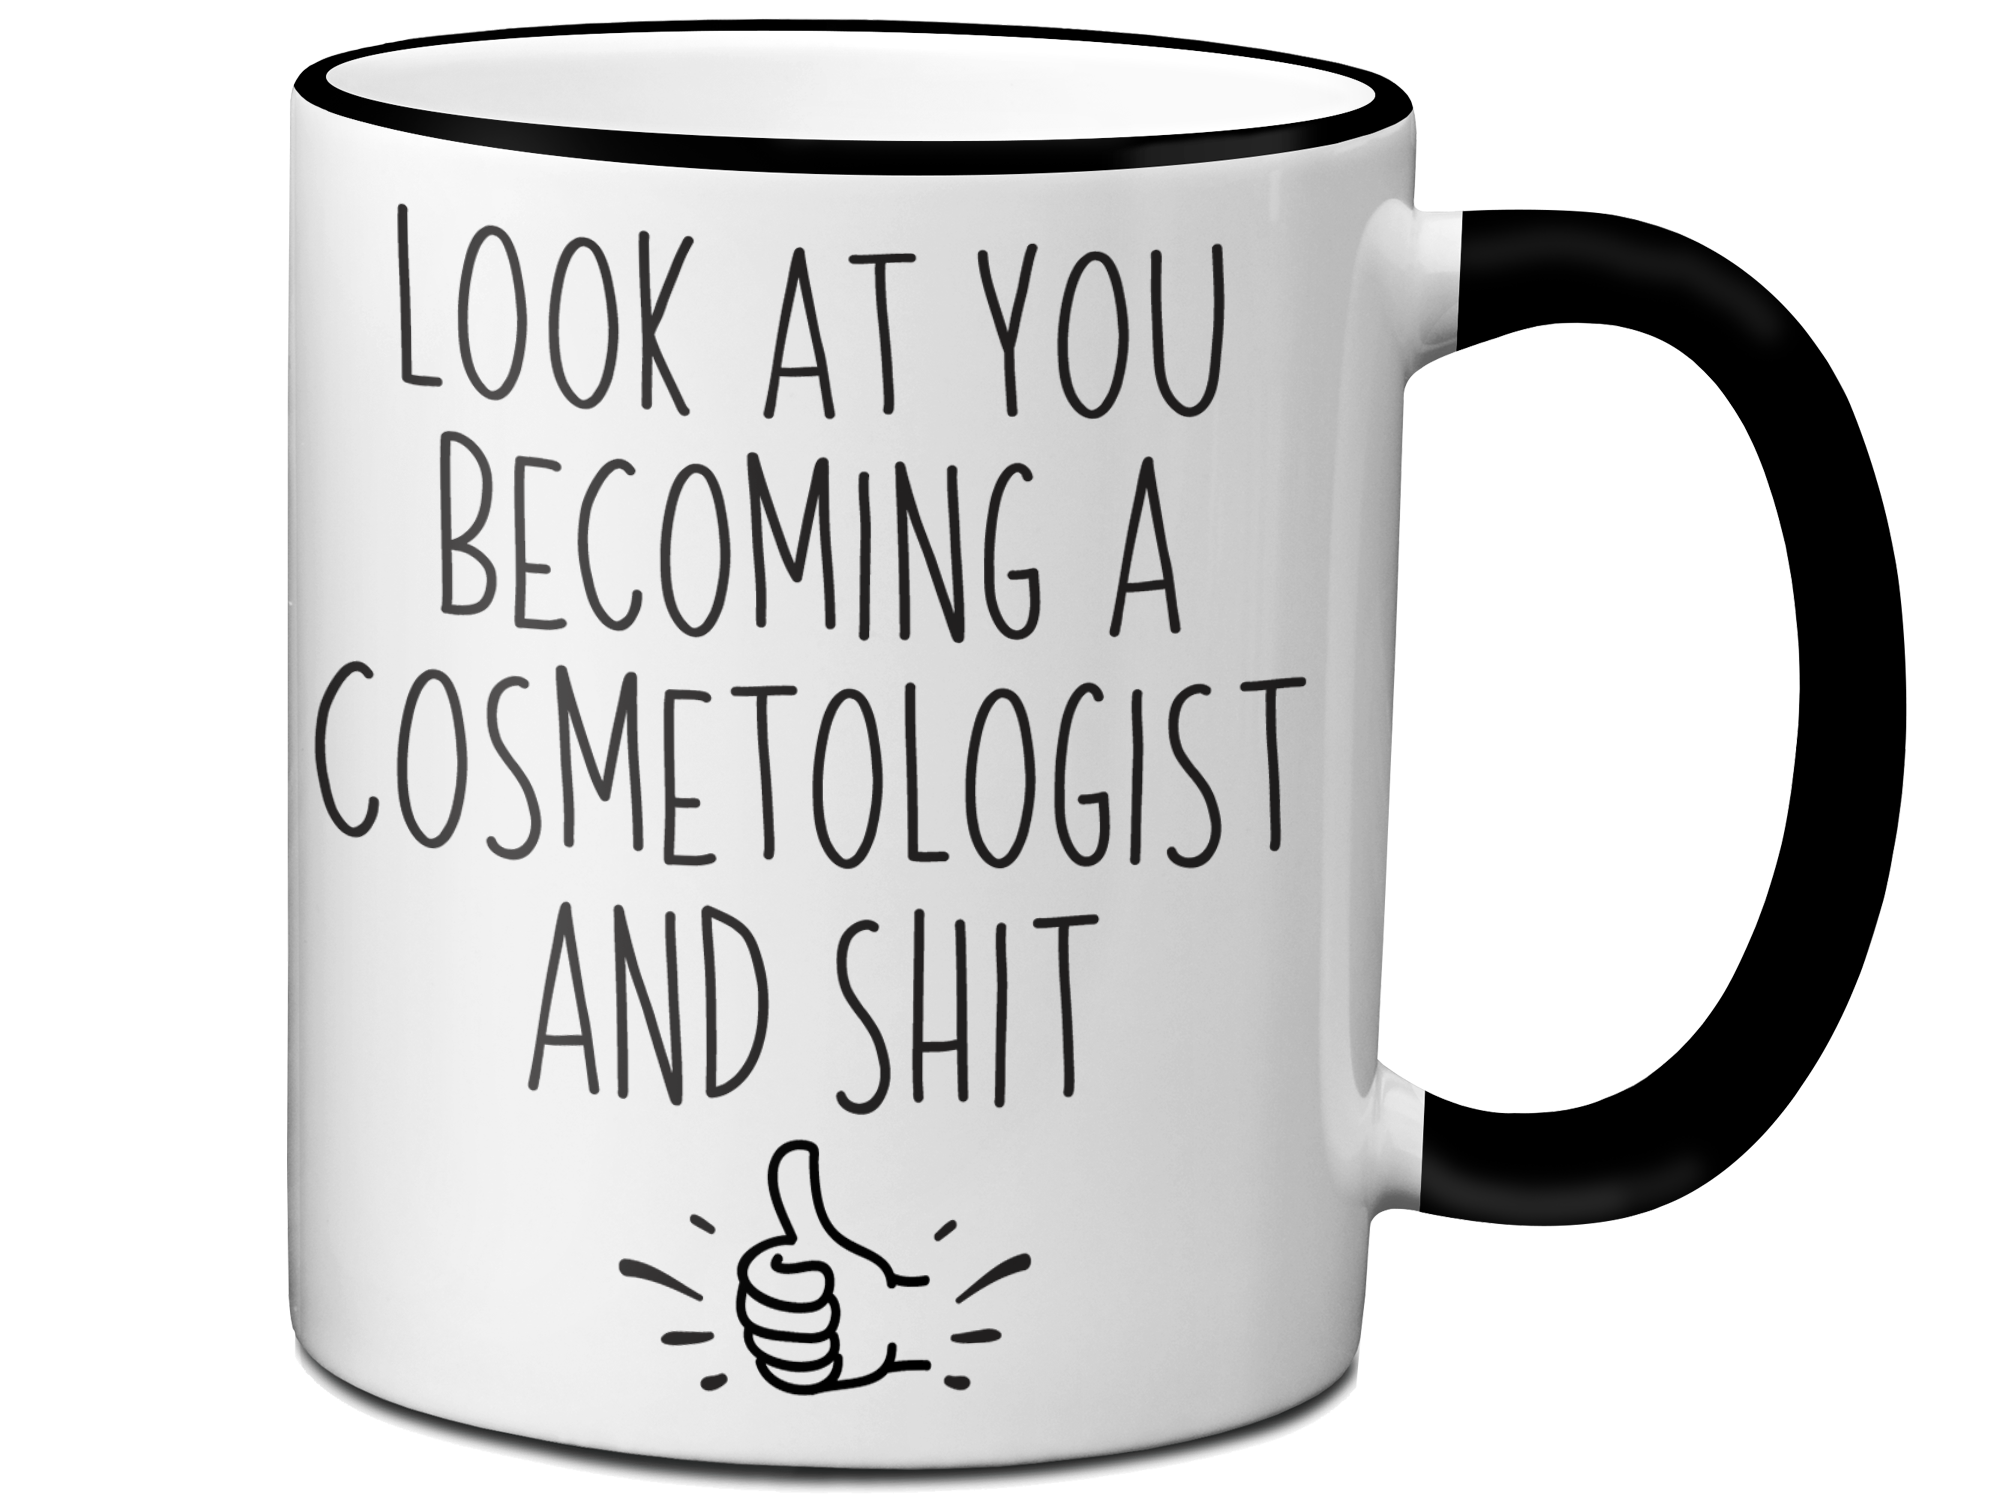 Graduation Gifts for Cosmetologists - Look at You Becoming a Cosmetologist and Shit Funny Coffee Mug